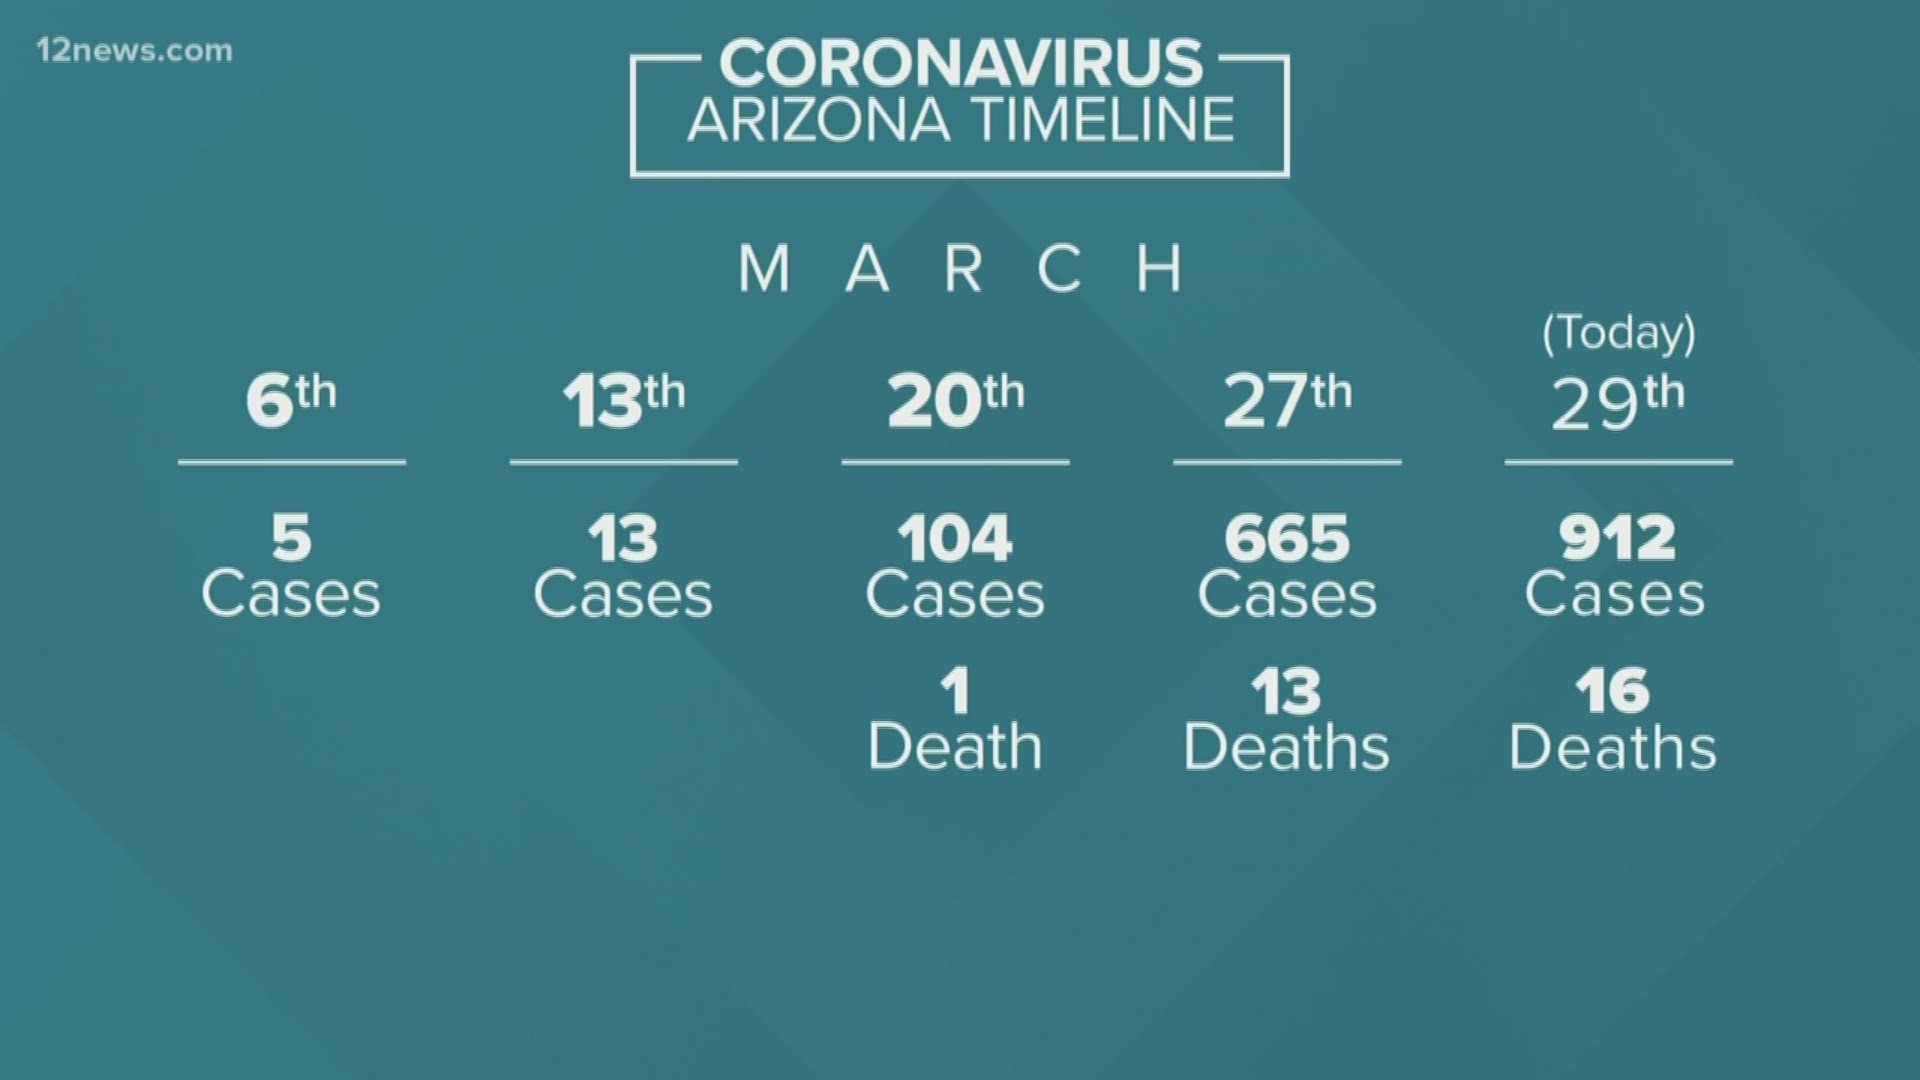 The number of coronavirus cases across the state rose to 912, with 16 deaths as of Sunday morning.